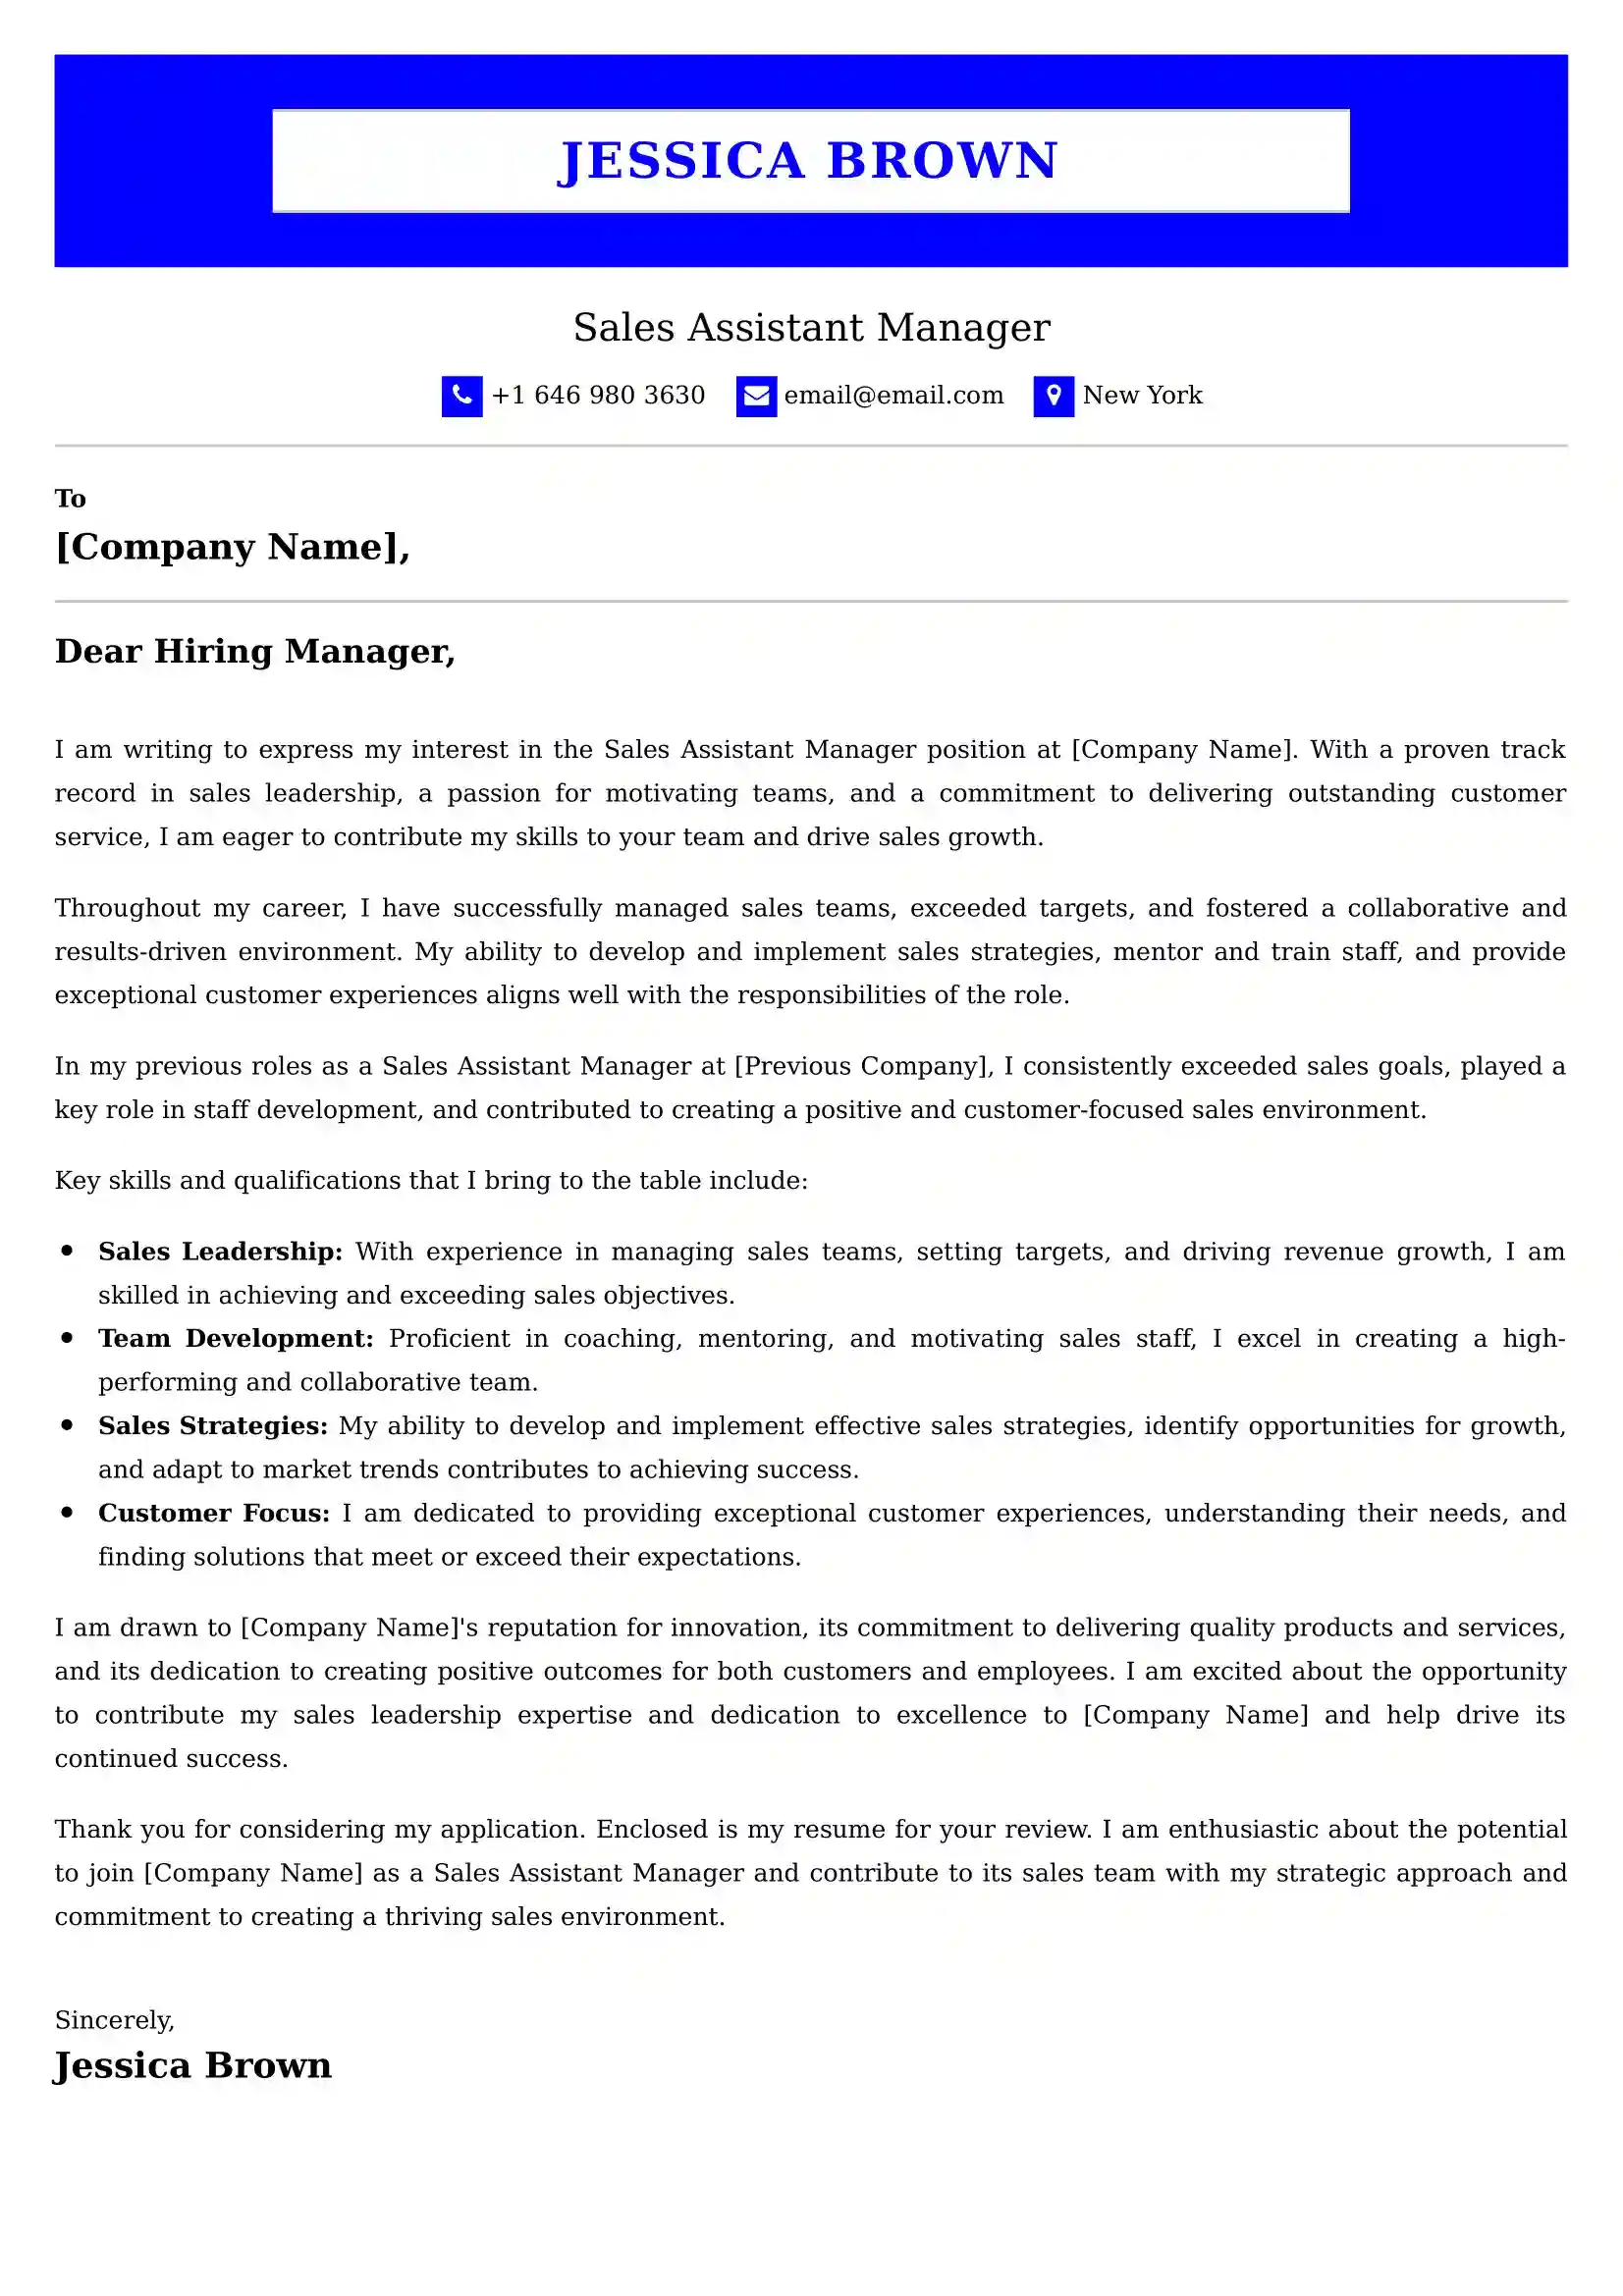 Sales Assistant Manager Cover Letter Examples India